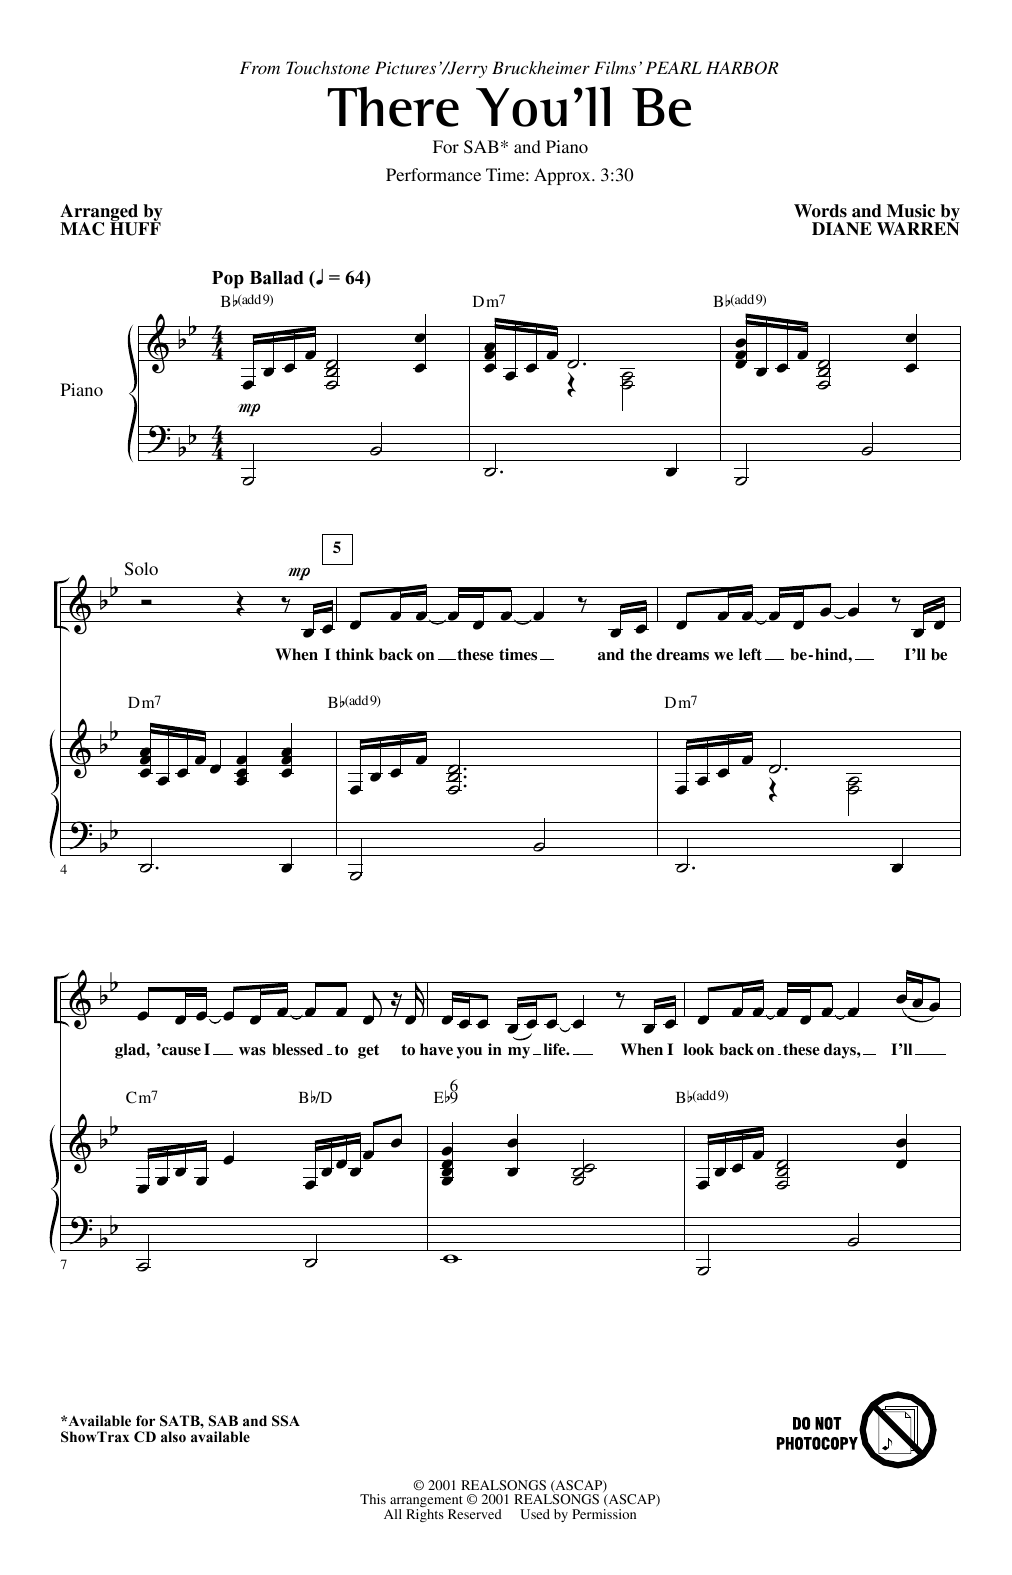 Download Faith Hill There You'll Be (from Pearl Harbor) (ar Sheet Music